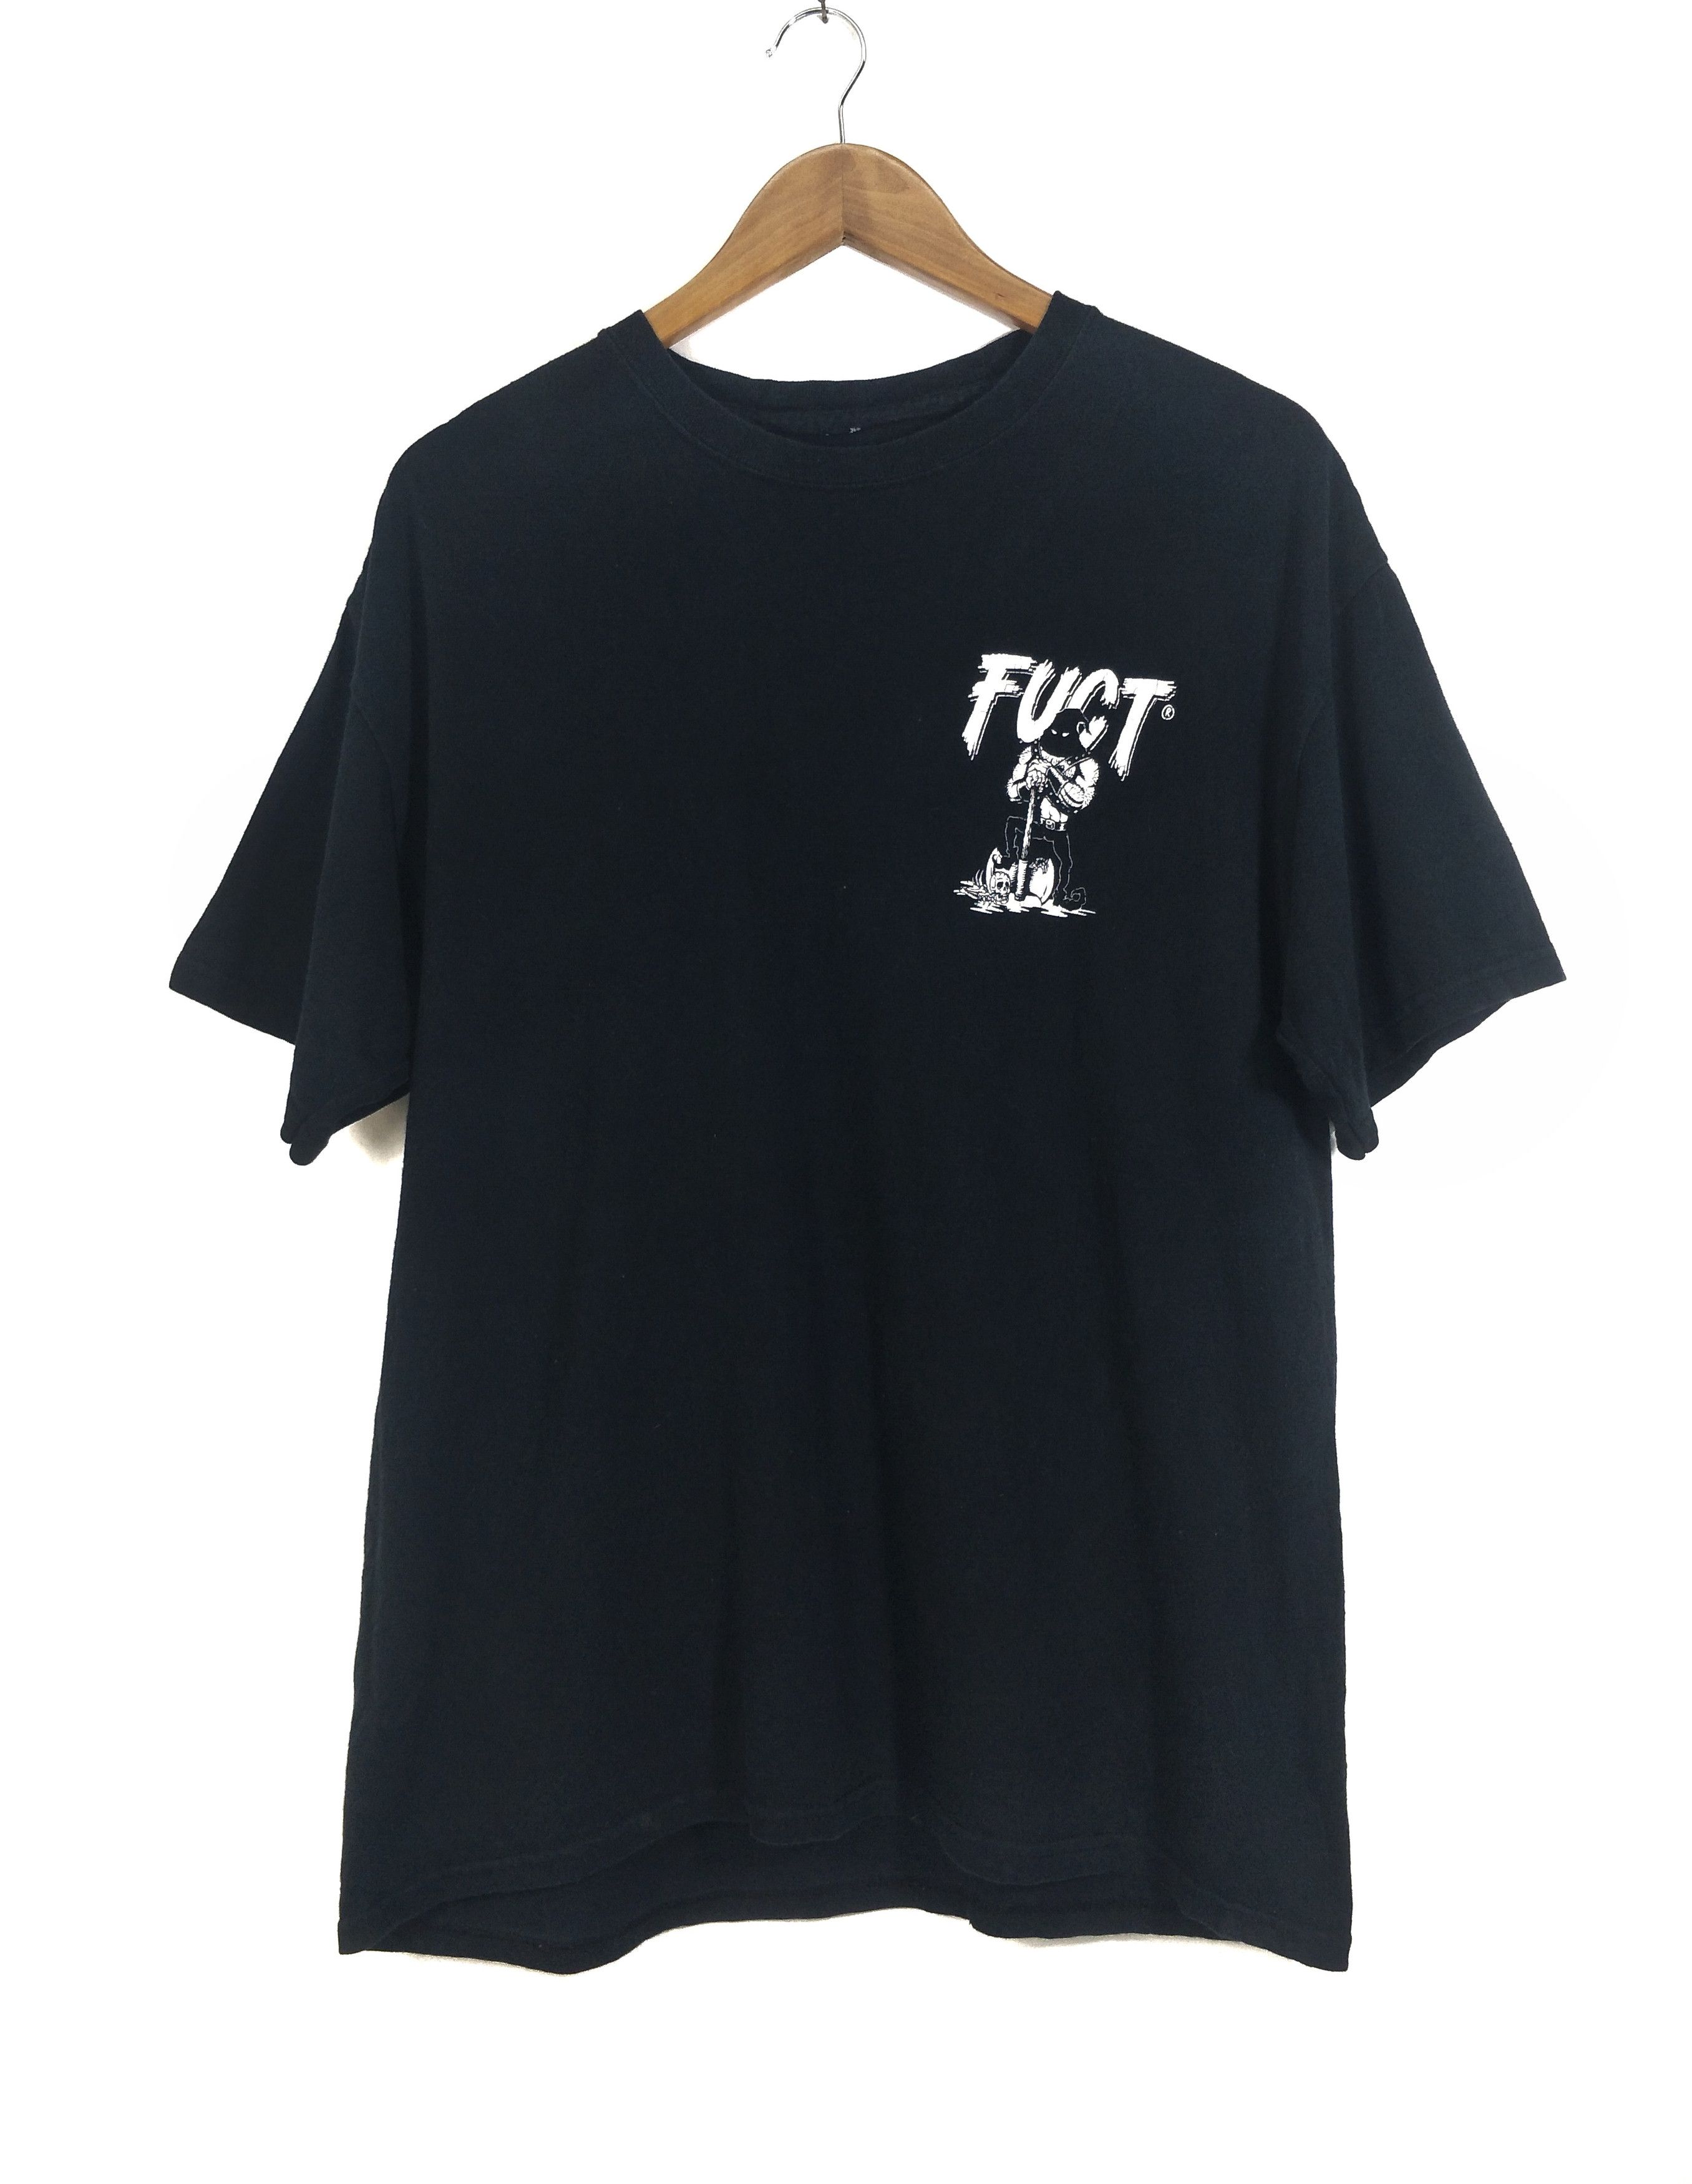 Fuct Fuct Skull Tee Size US L / EU 52-54 / 3 - 2 Preview